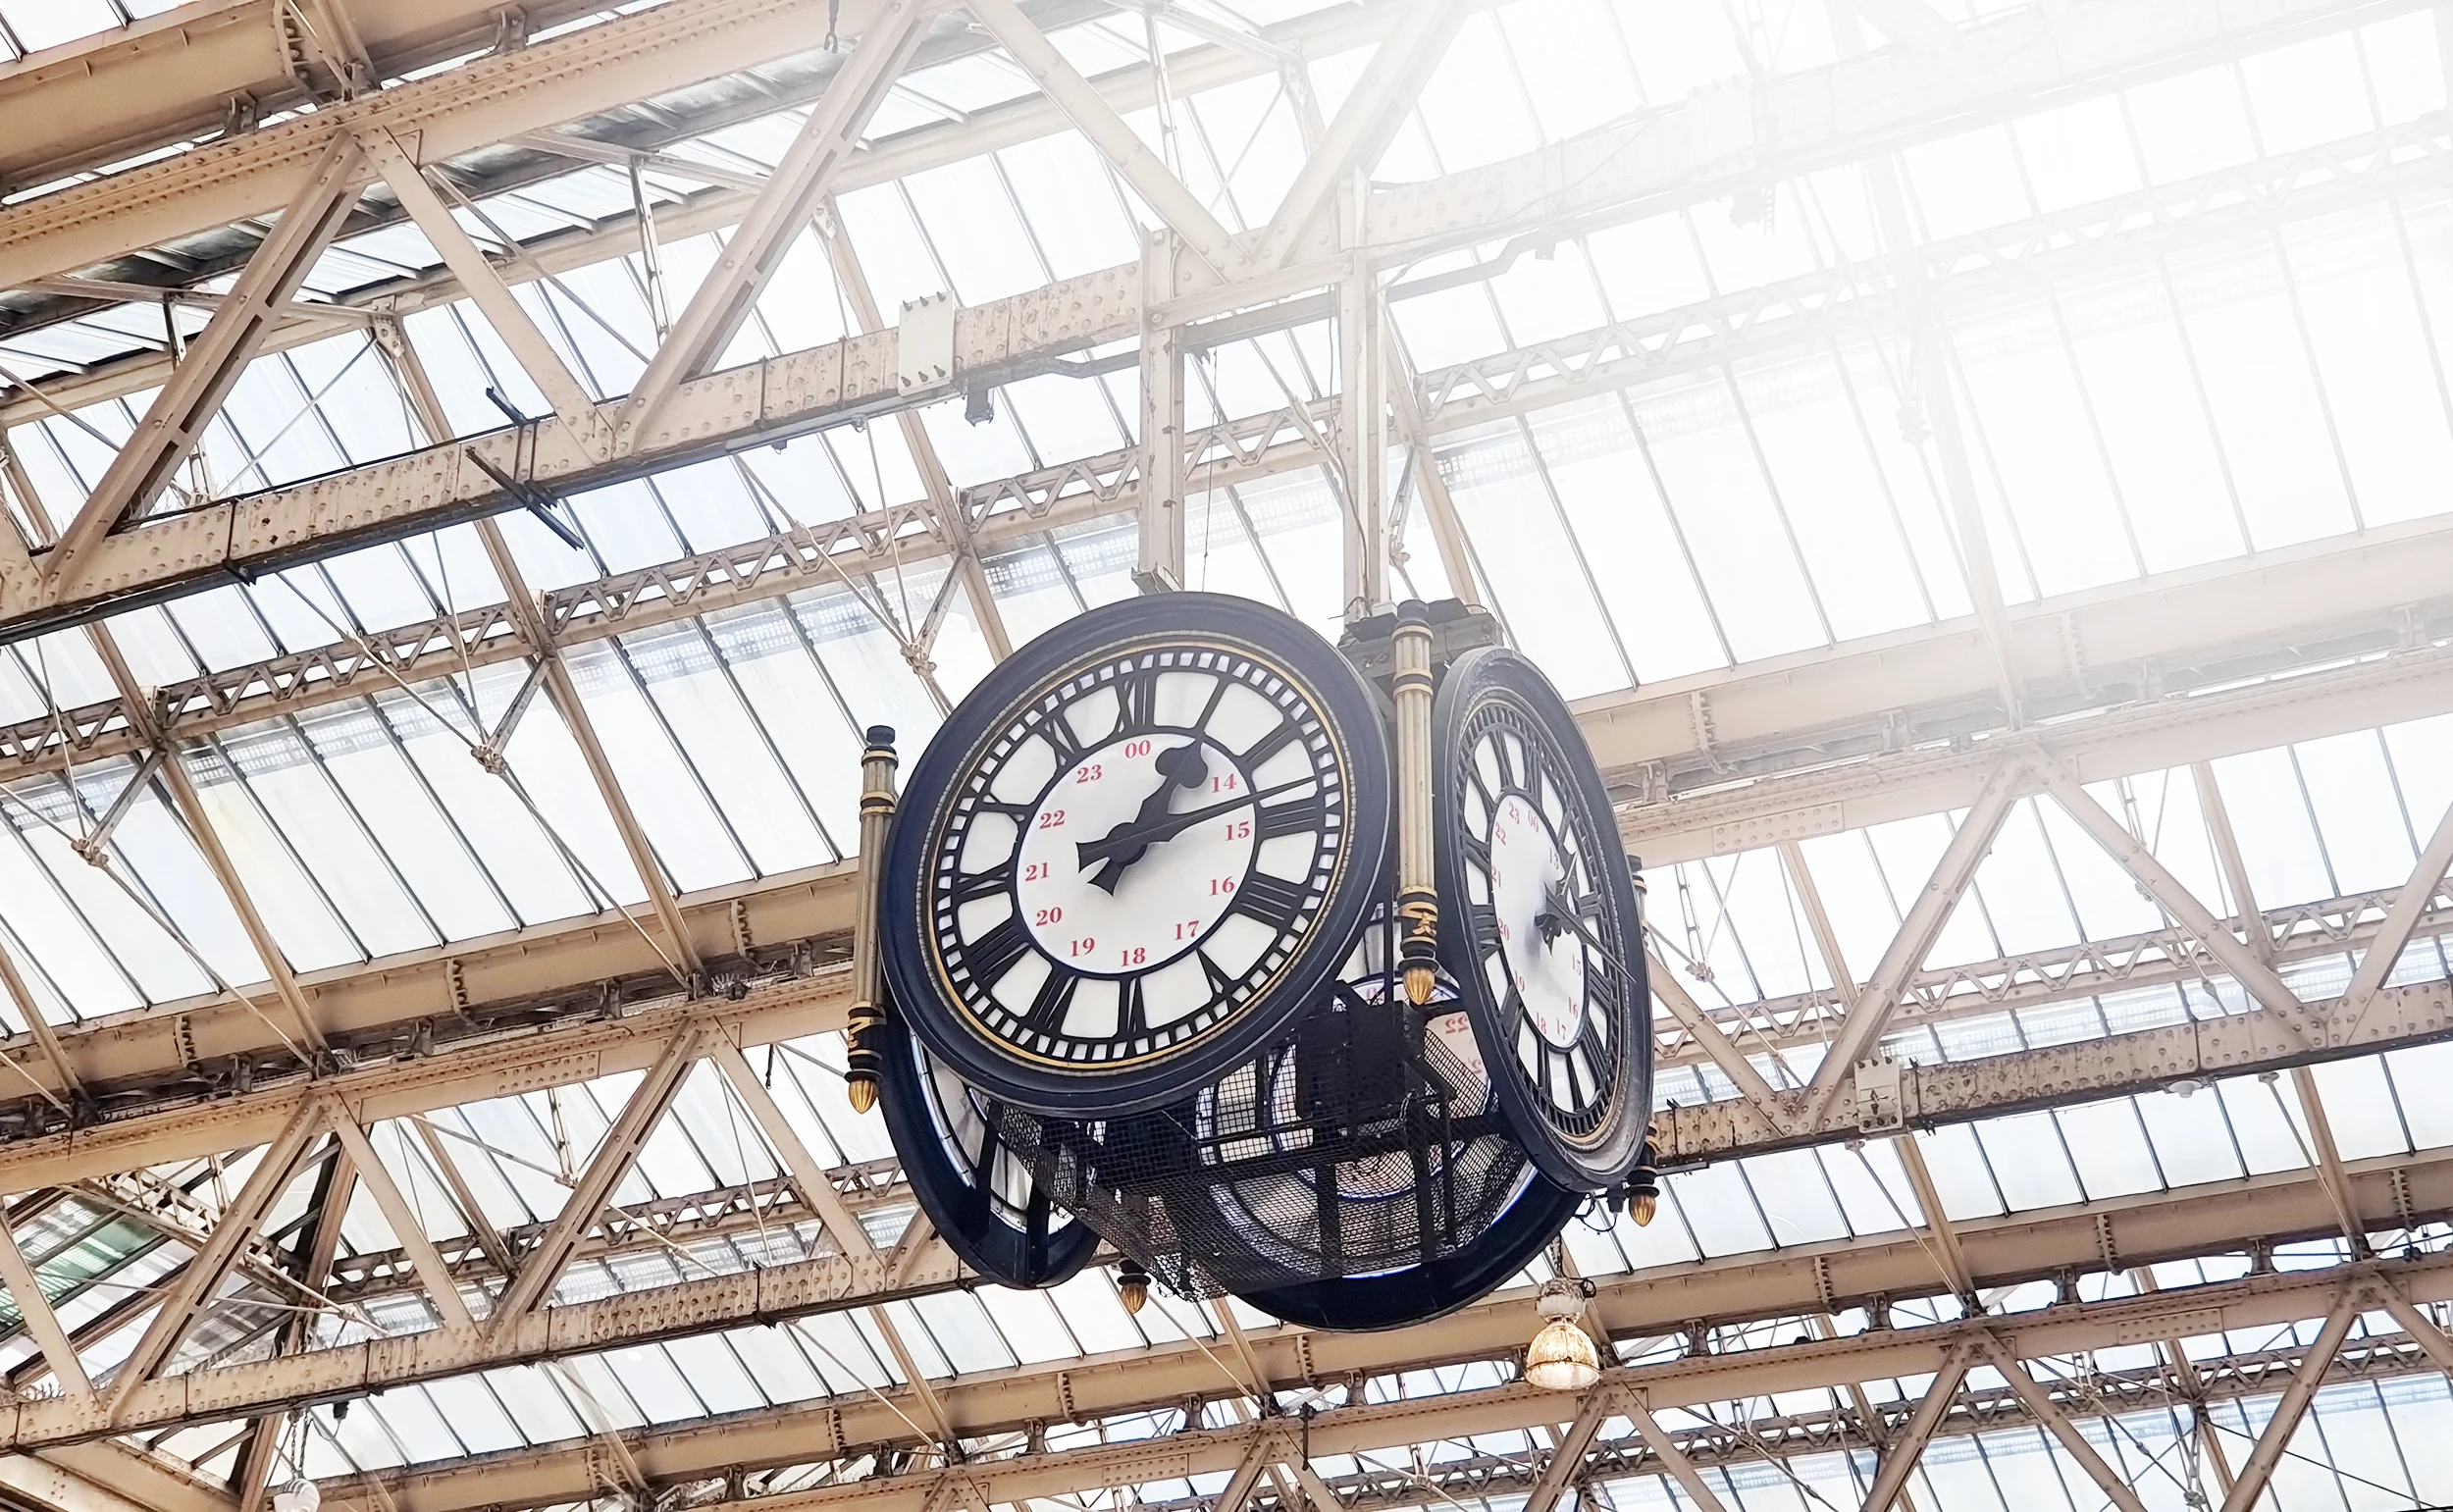 The four-faced hanging clock at Waterloo station on a sunny day